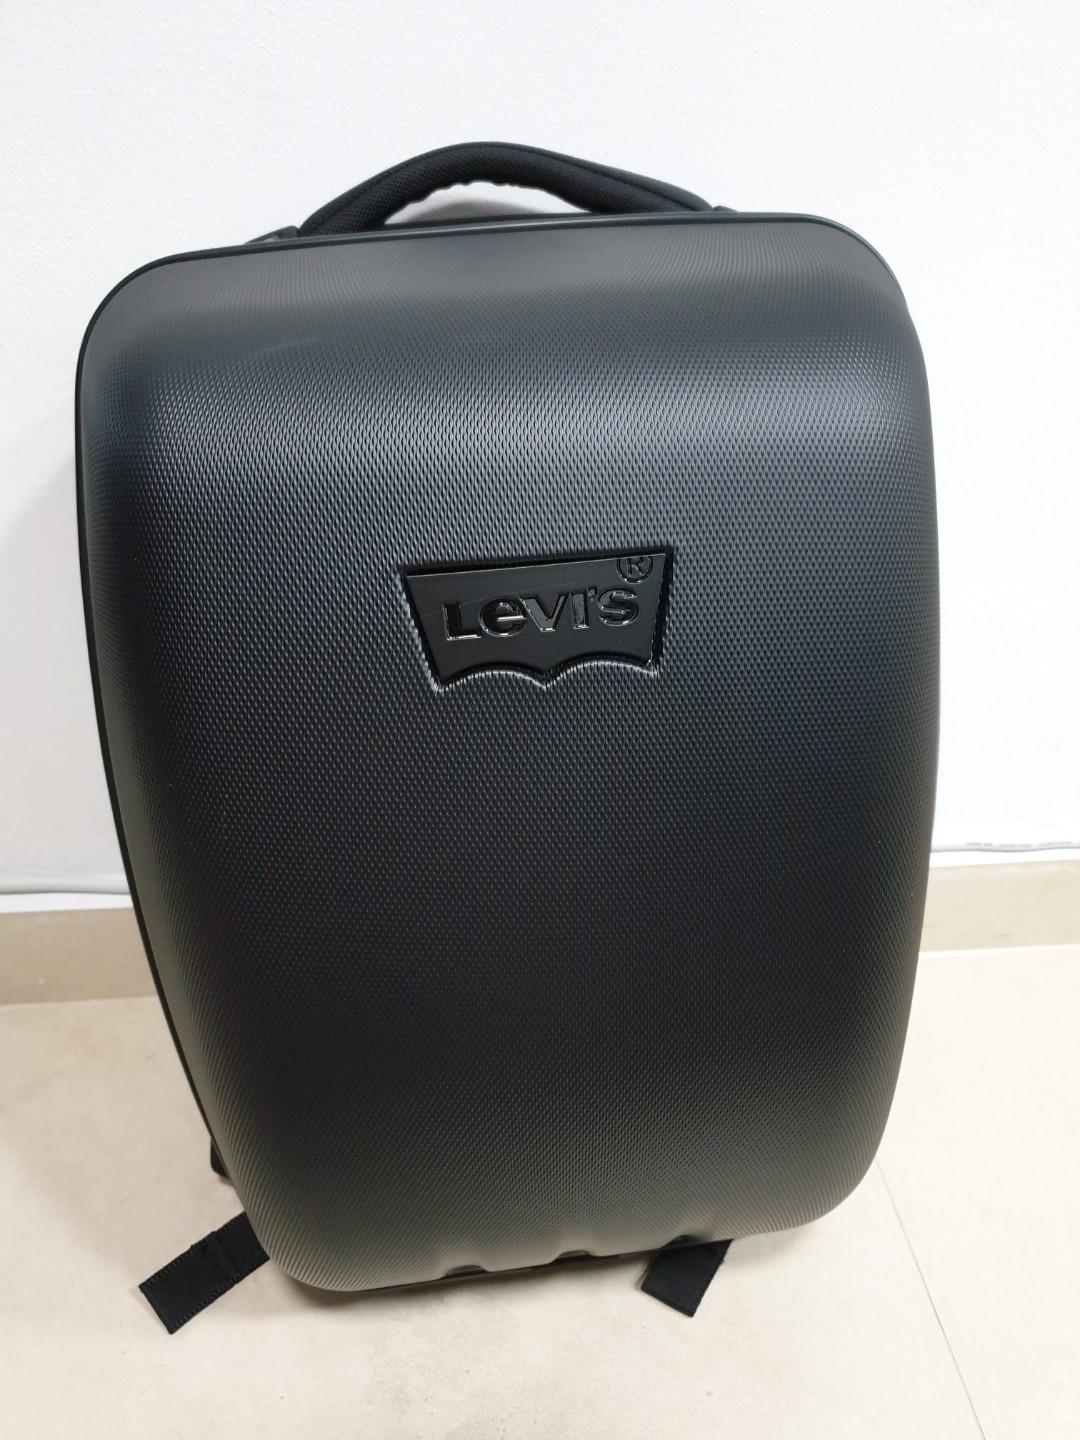 levis hard shell backpack off 58% - www 